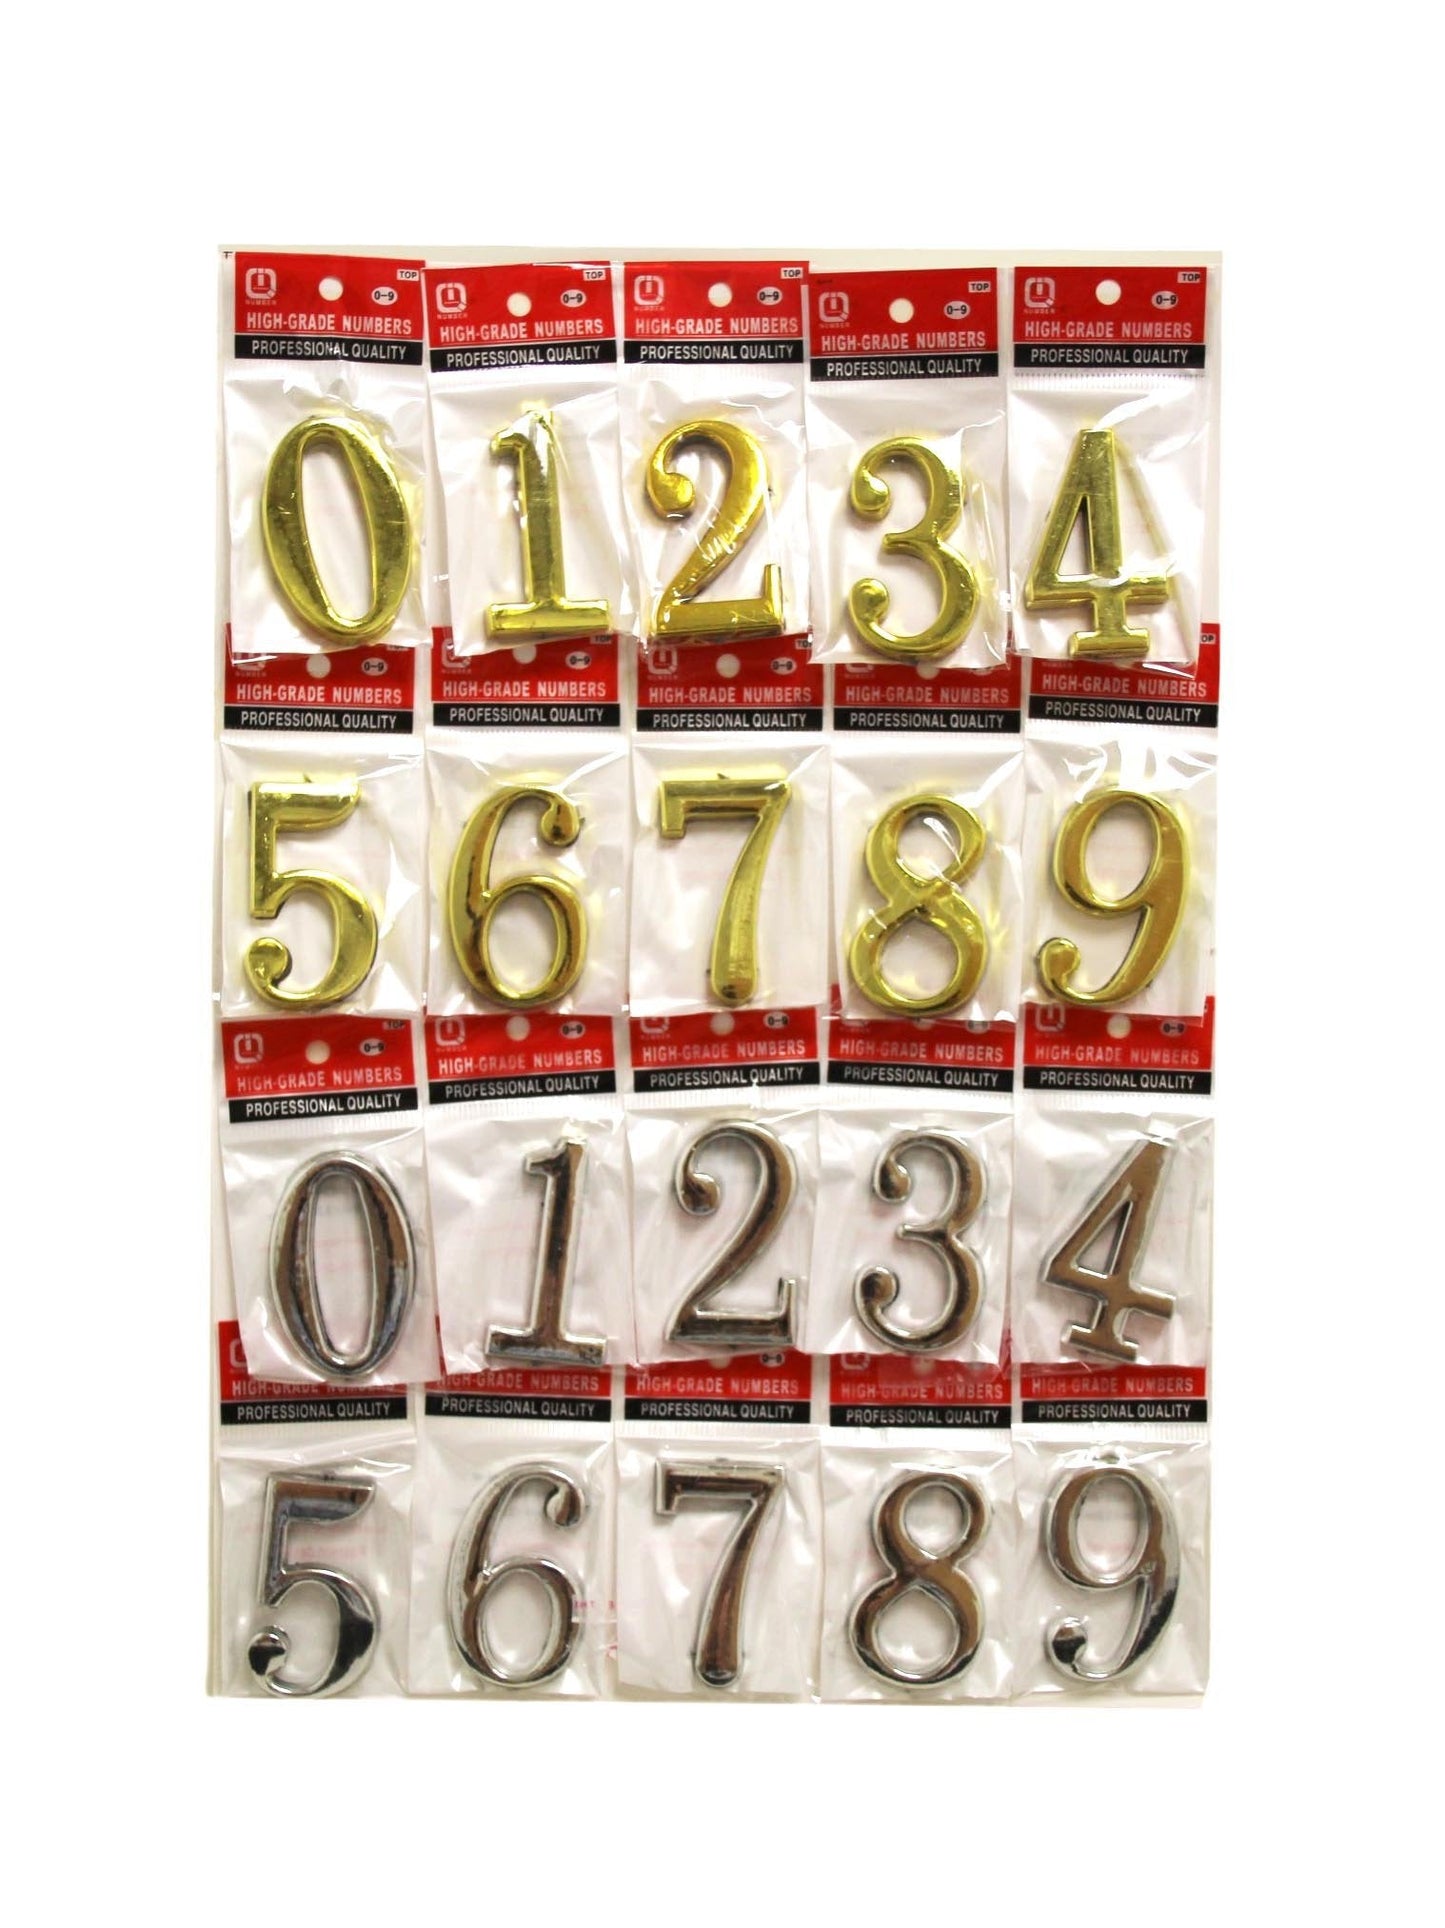 3D Door House Numbers Self Adhesive Gold Silver Times Roman Style Door Number 6059 (Parcel Rate)